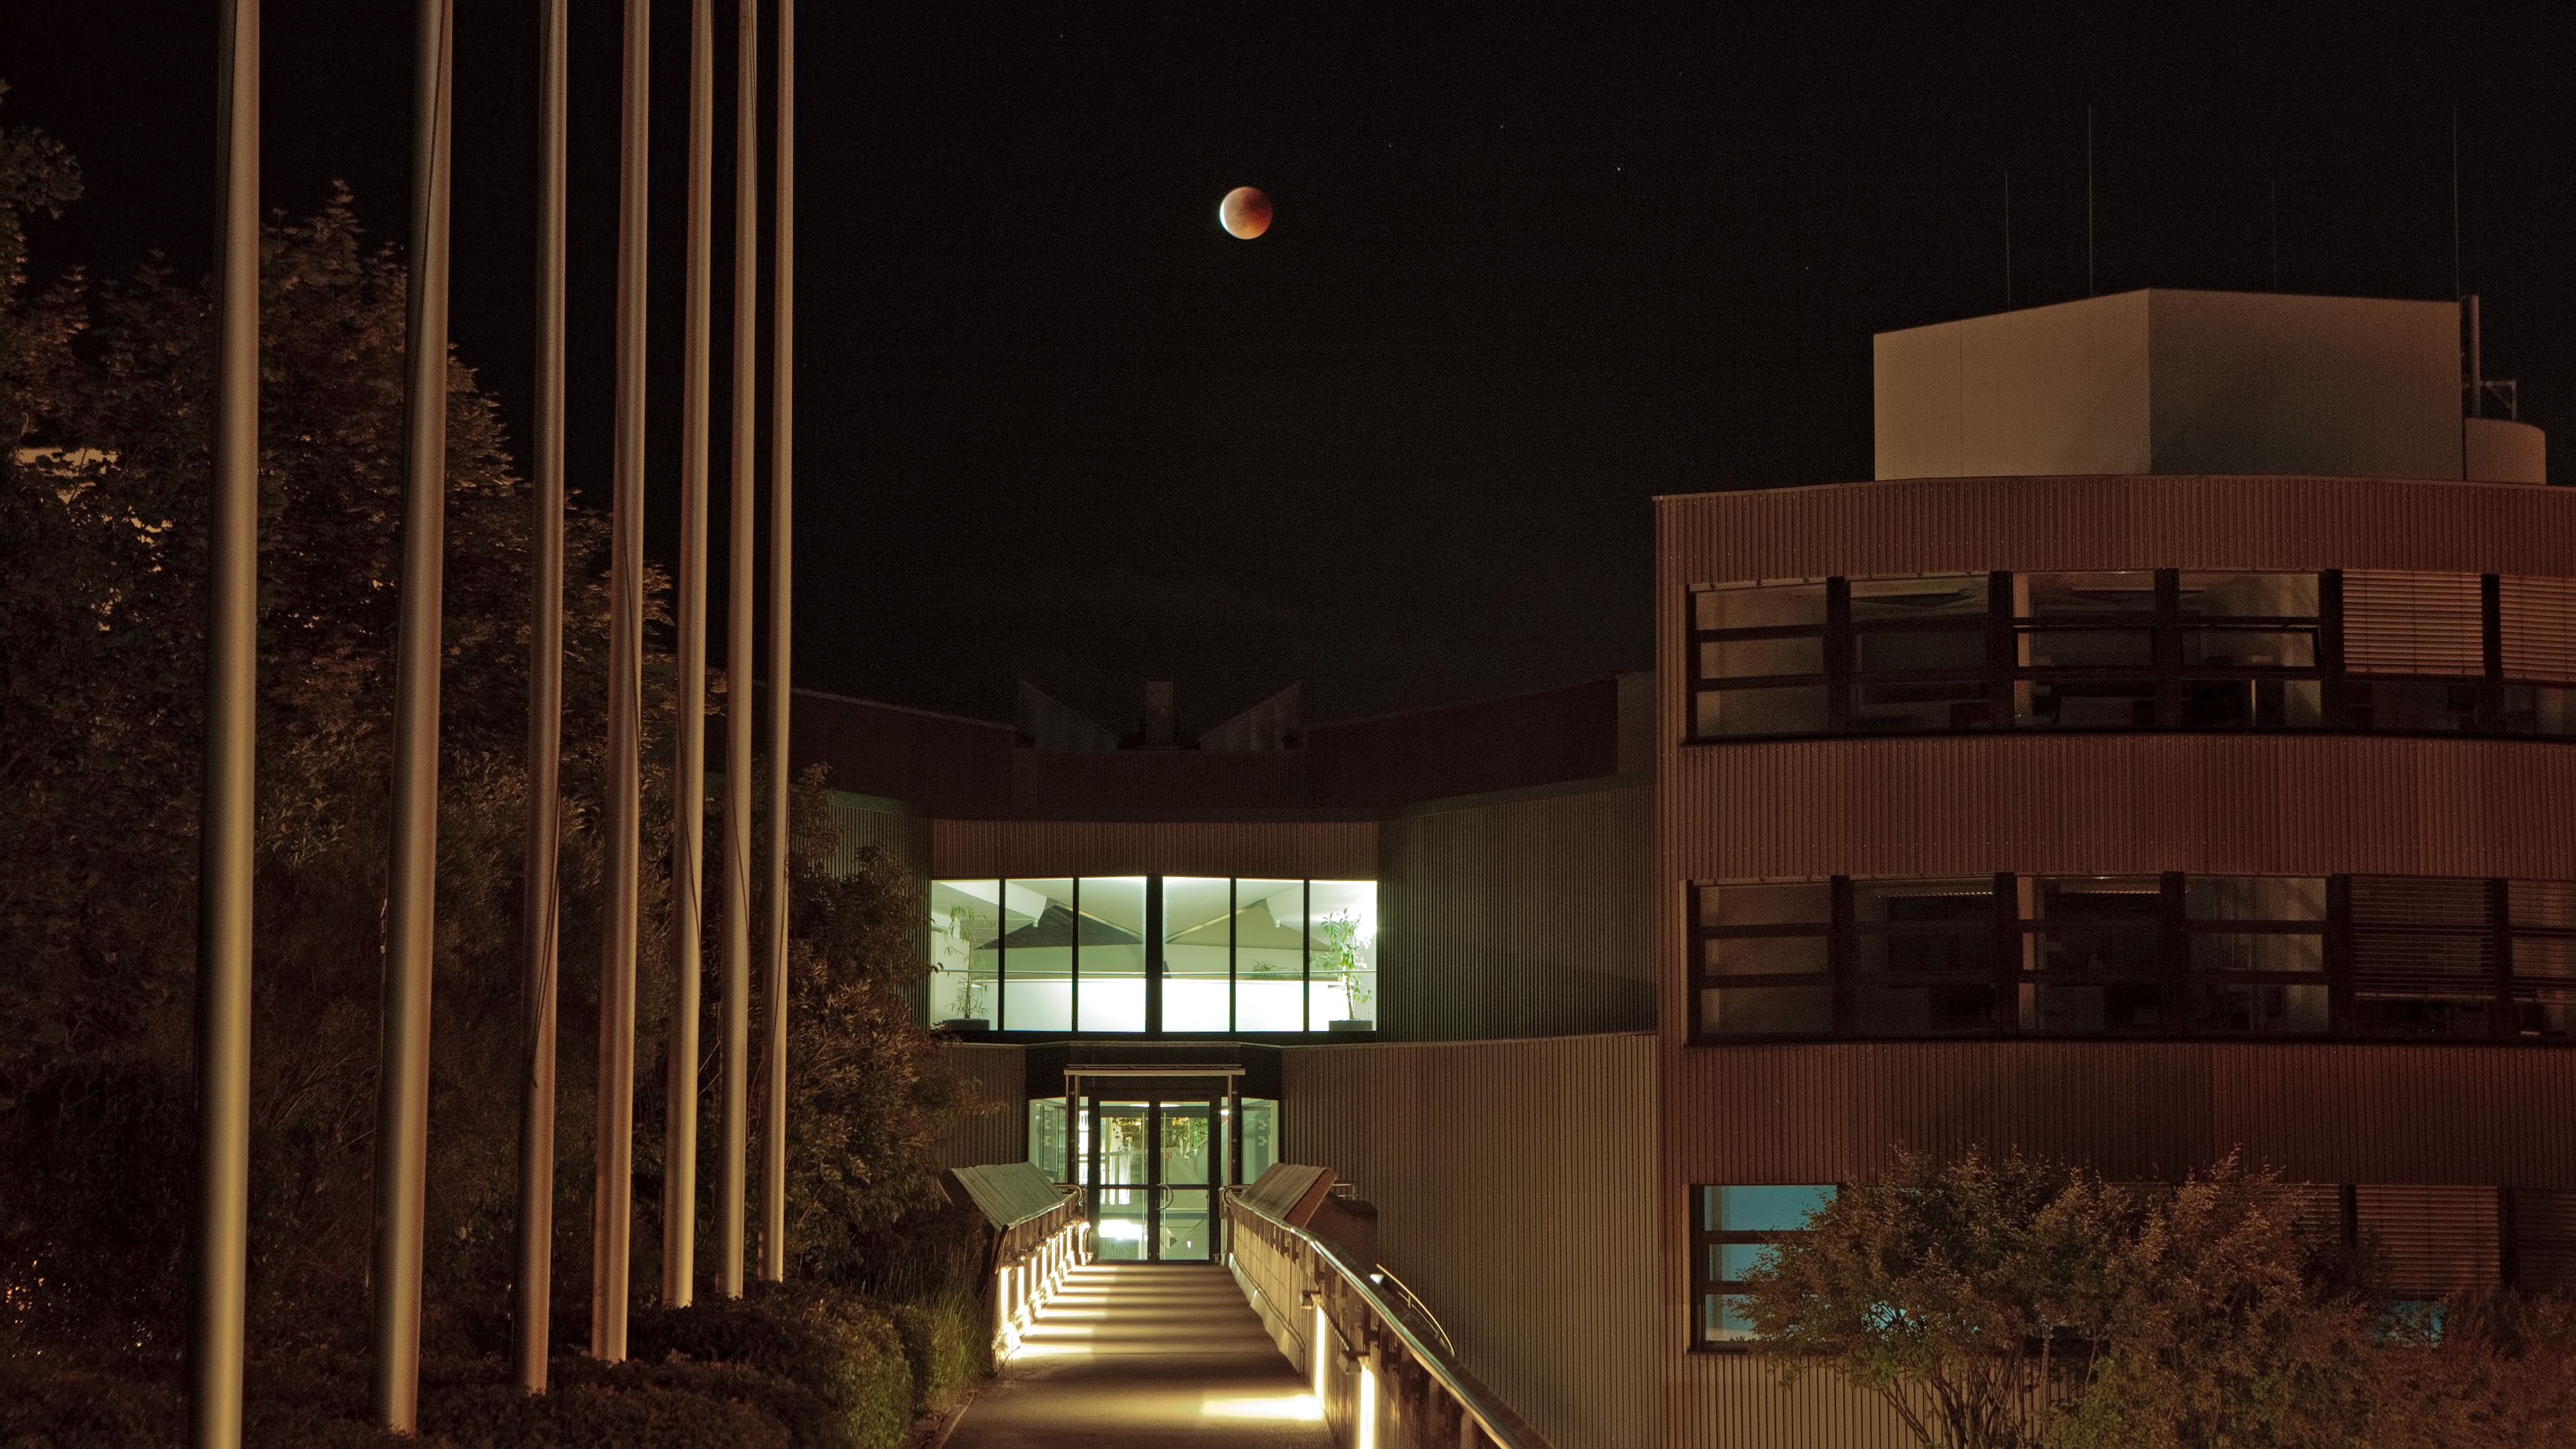 A blood-red moon above a building.